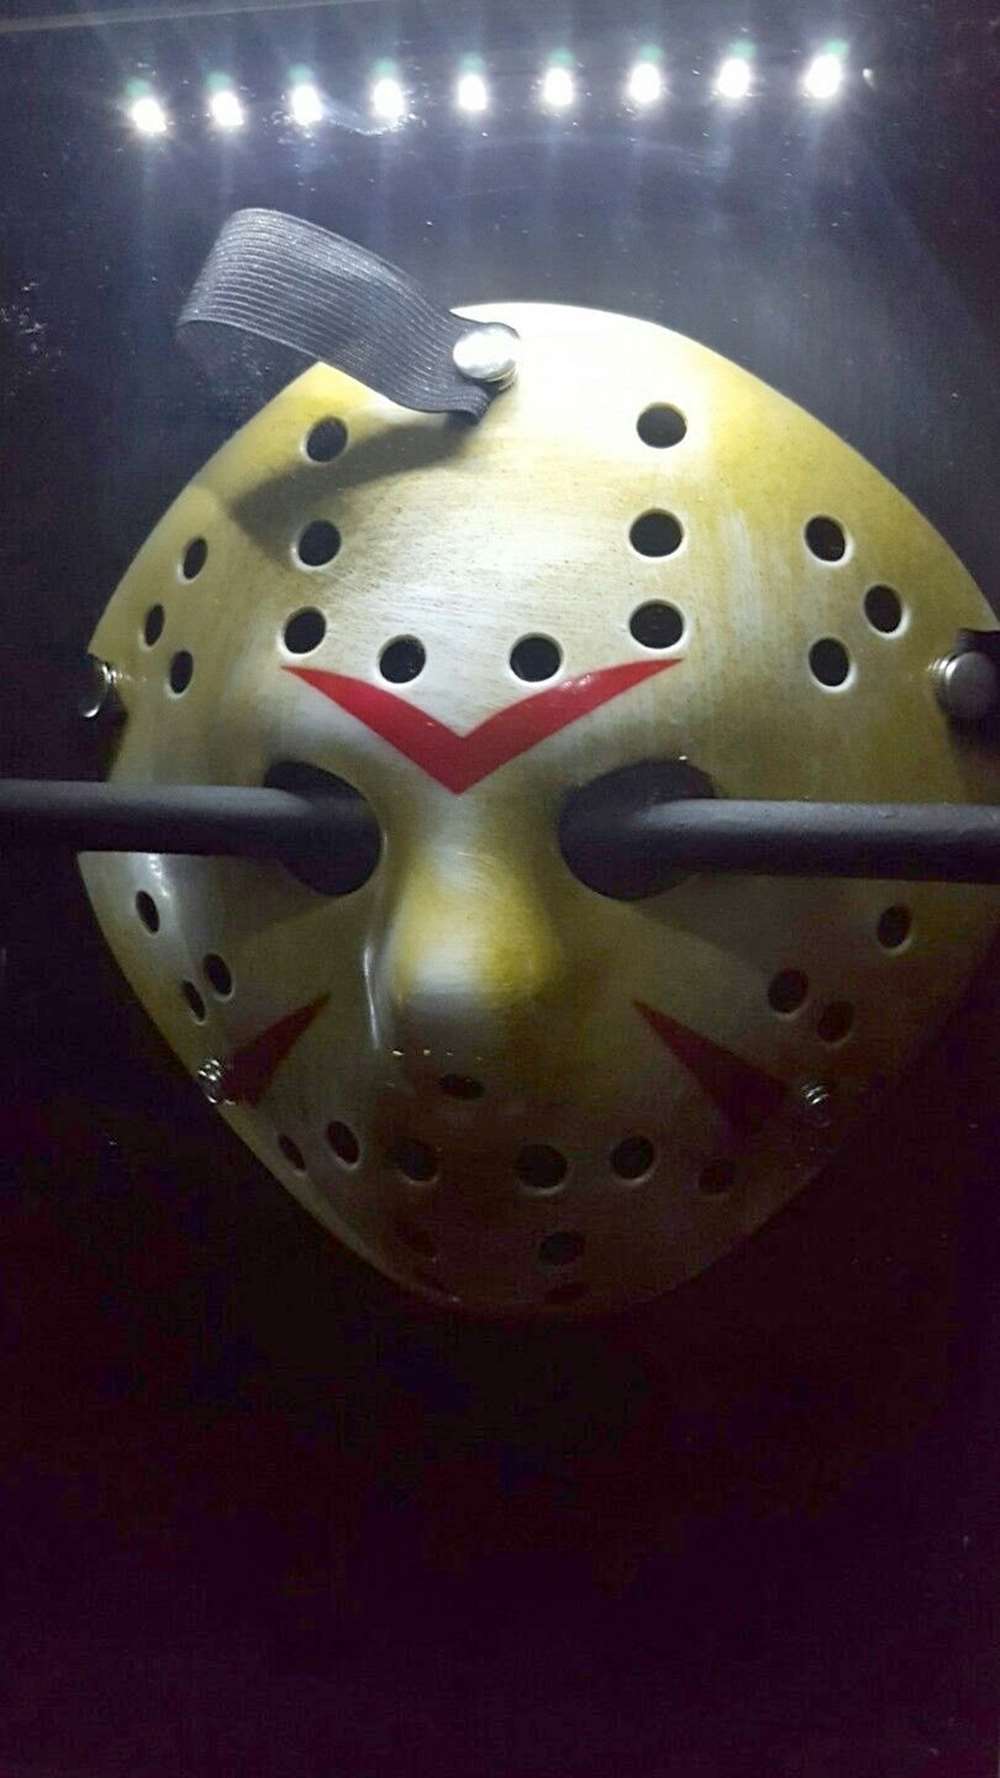 Signed 3D Friday the 13th Jason Display With Mask & Machete led lighting - Image 7 of 7